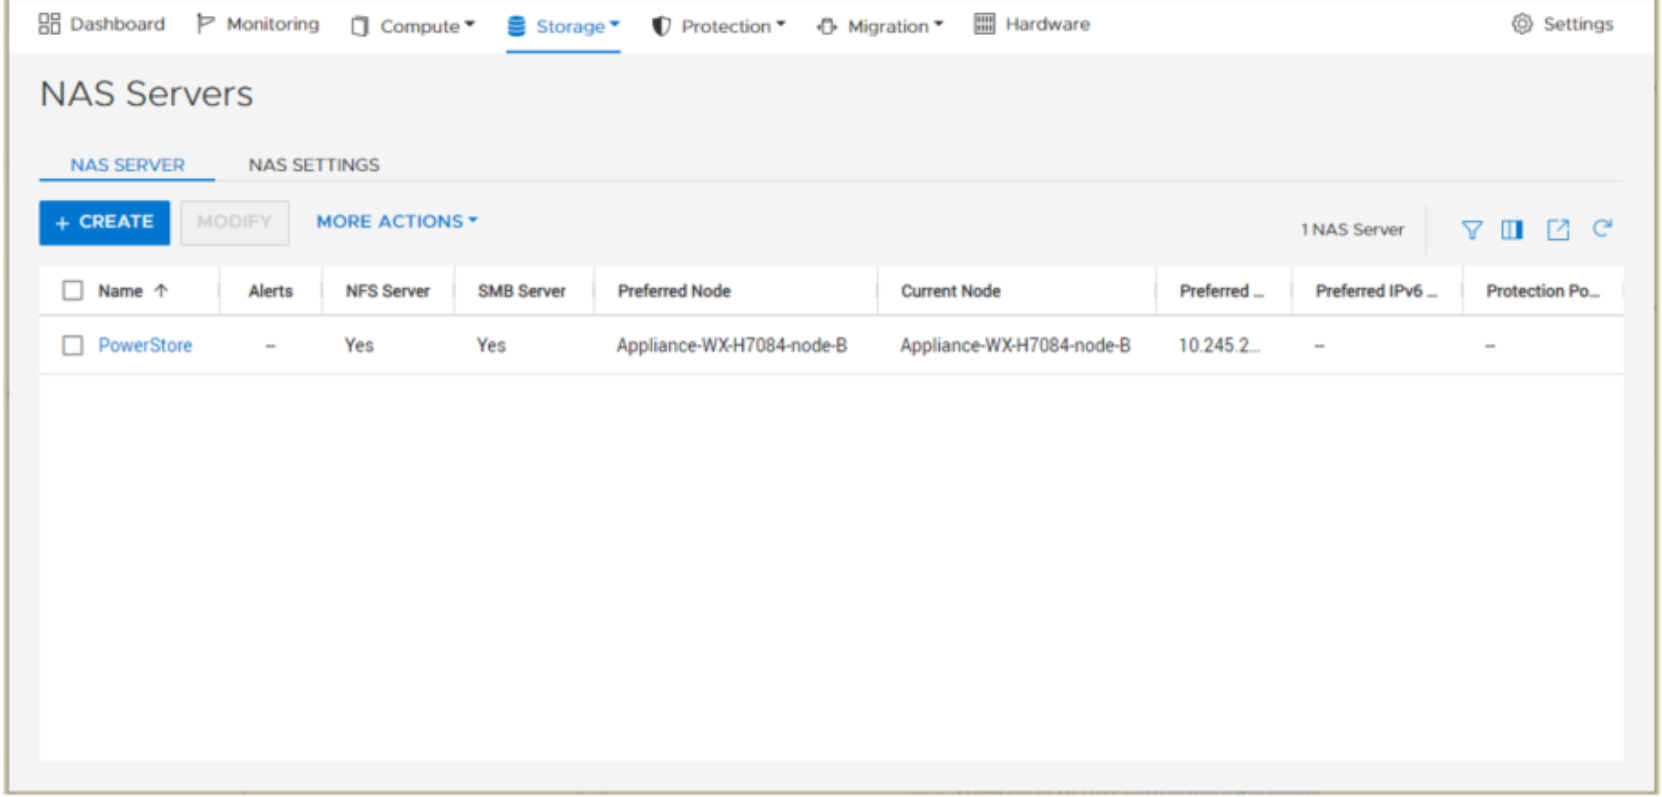 A screenshot of PowerStore Manager showing the NAS Servers page which includes the current and preferred node columns.